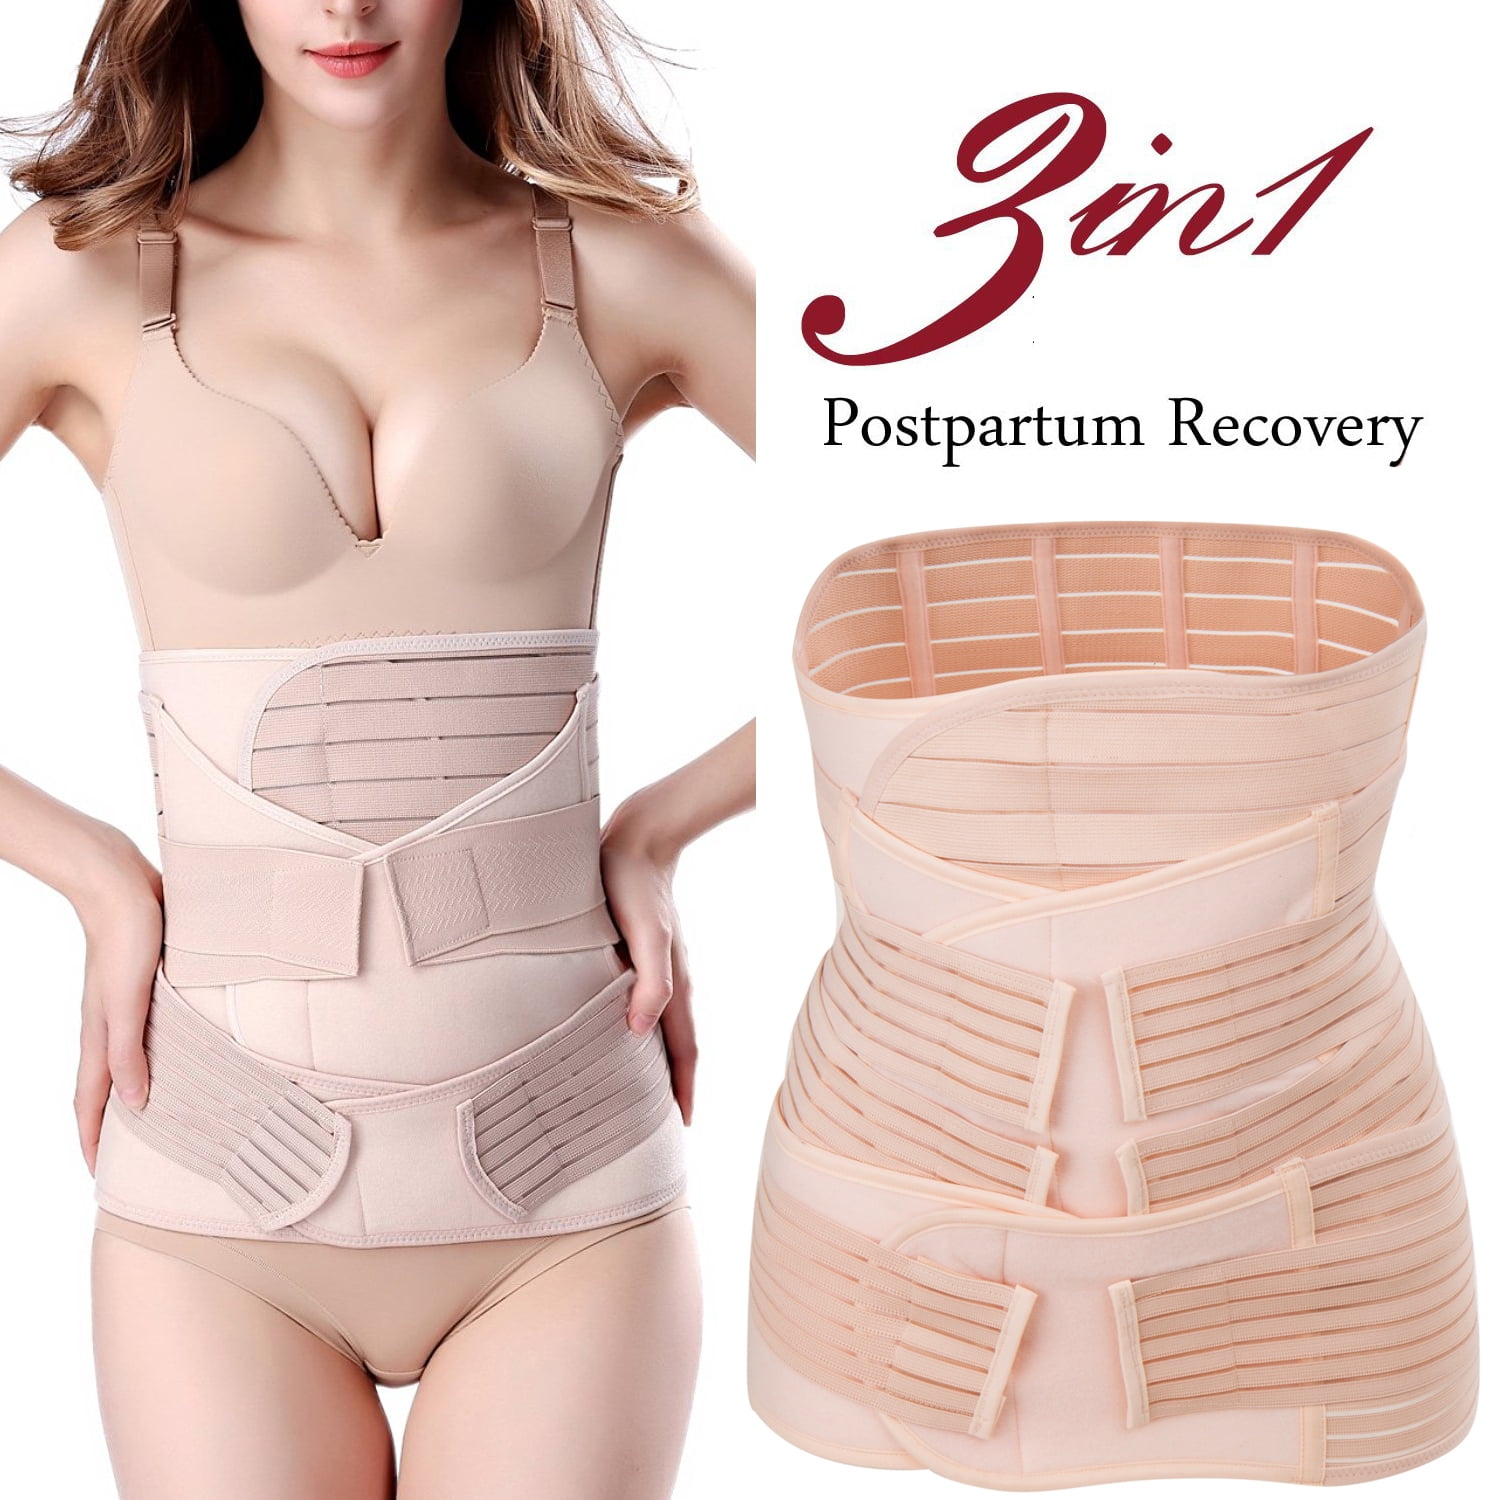 3 in 1 Postpartum Support Recovery Belly Wrap Waist/Pelvis Belt/Girdle Support Band Belt 